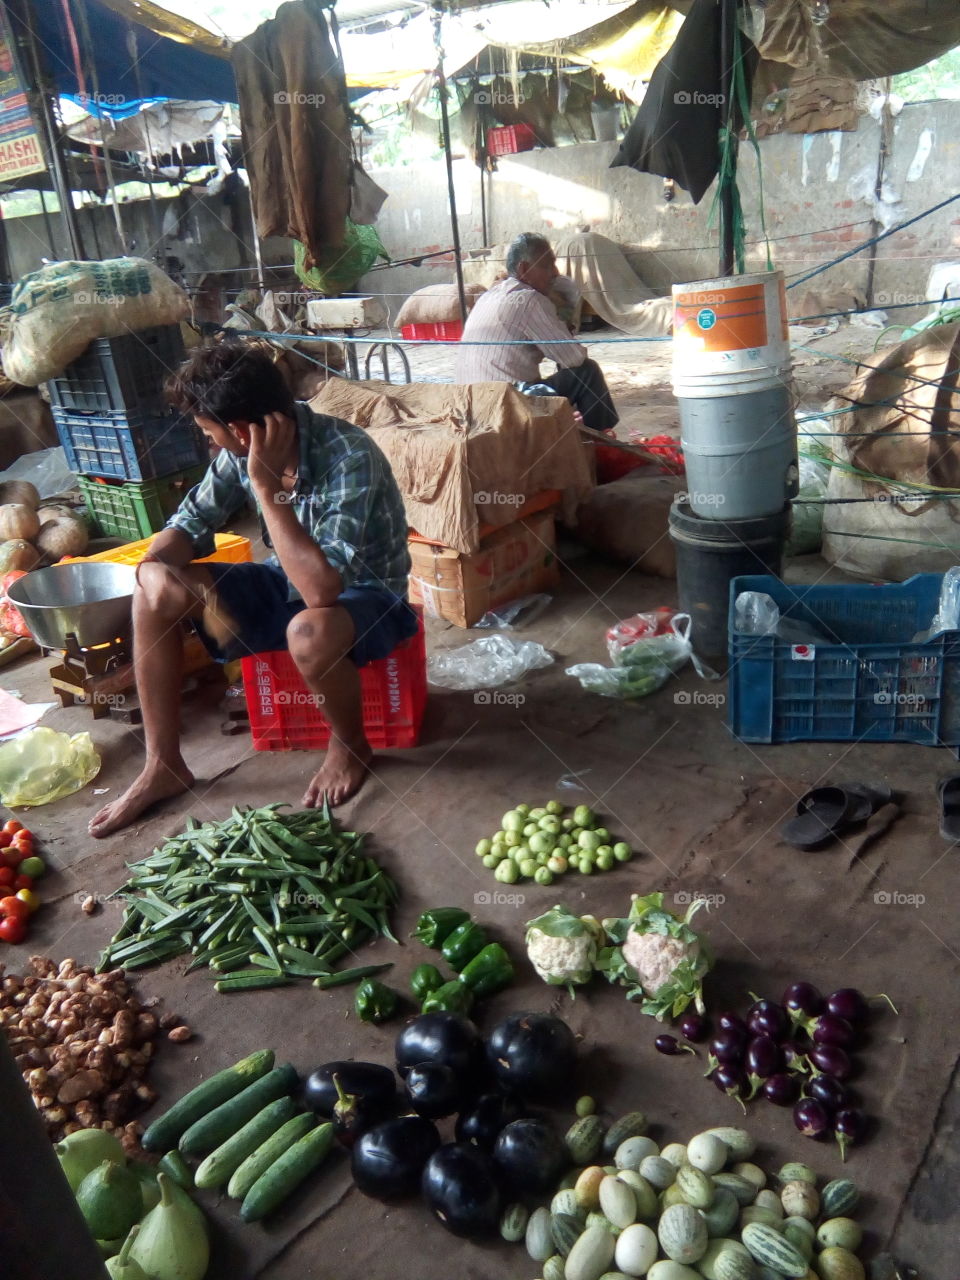 a seen of a vegetable market- people in small business.